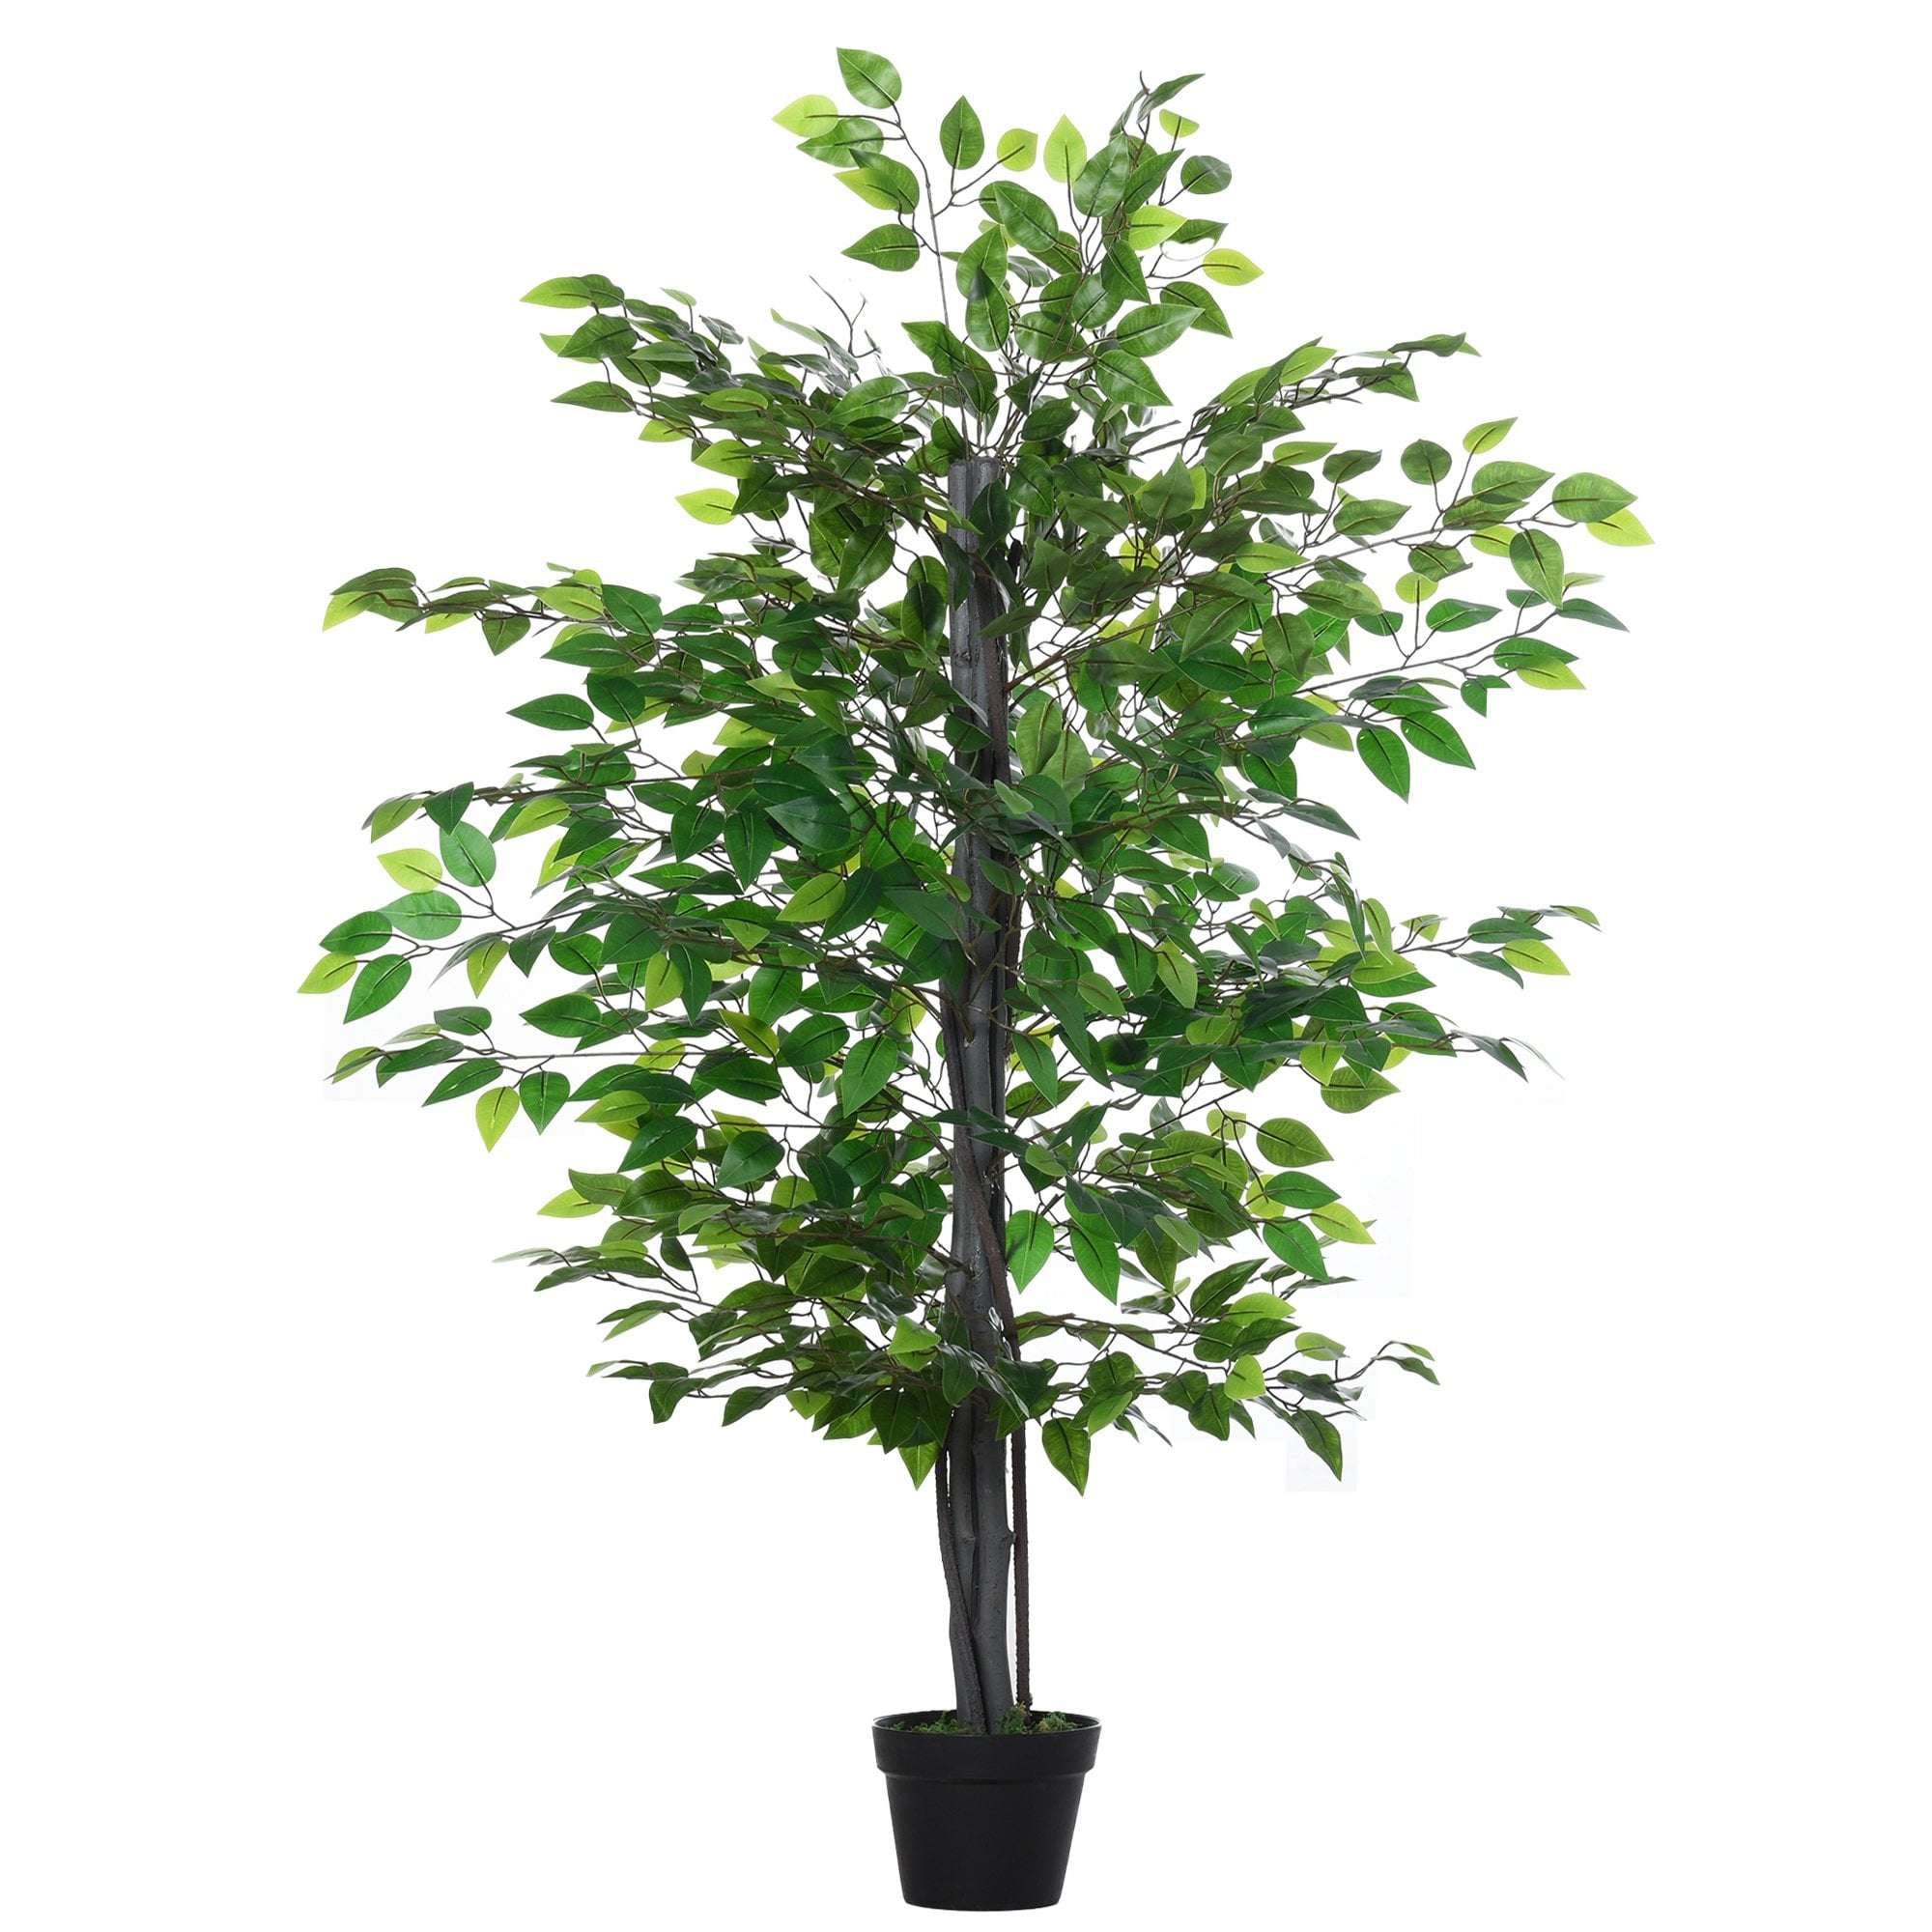 Outsunny Artificial Banyan Decorative Plant with Nursery Pot - Fake Tree for Indoor Outdoor D+cor - Green - 1.45m w/  | TJ Hughes